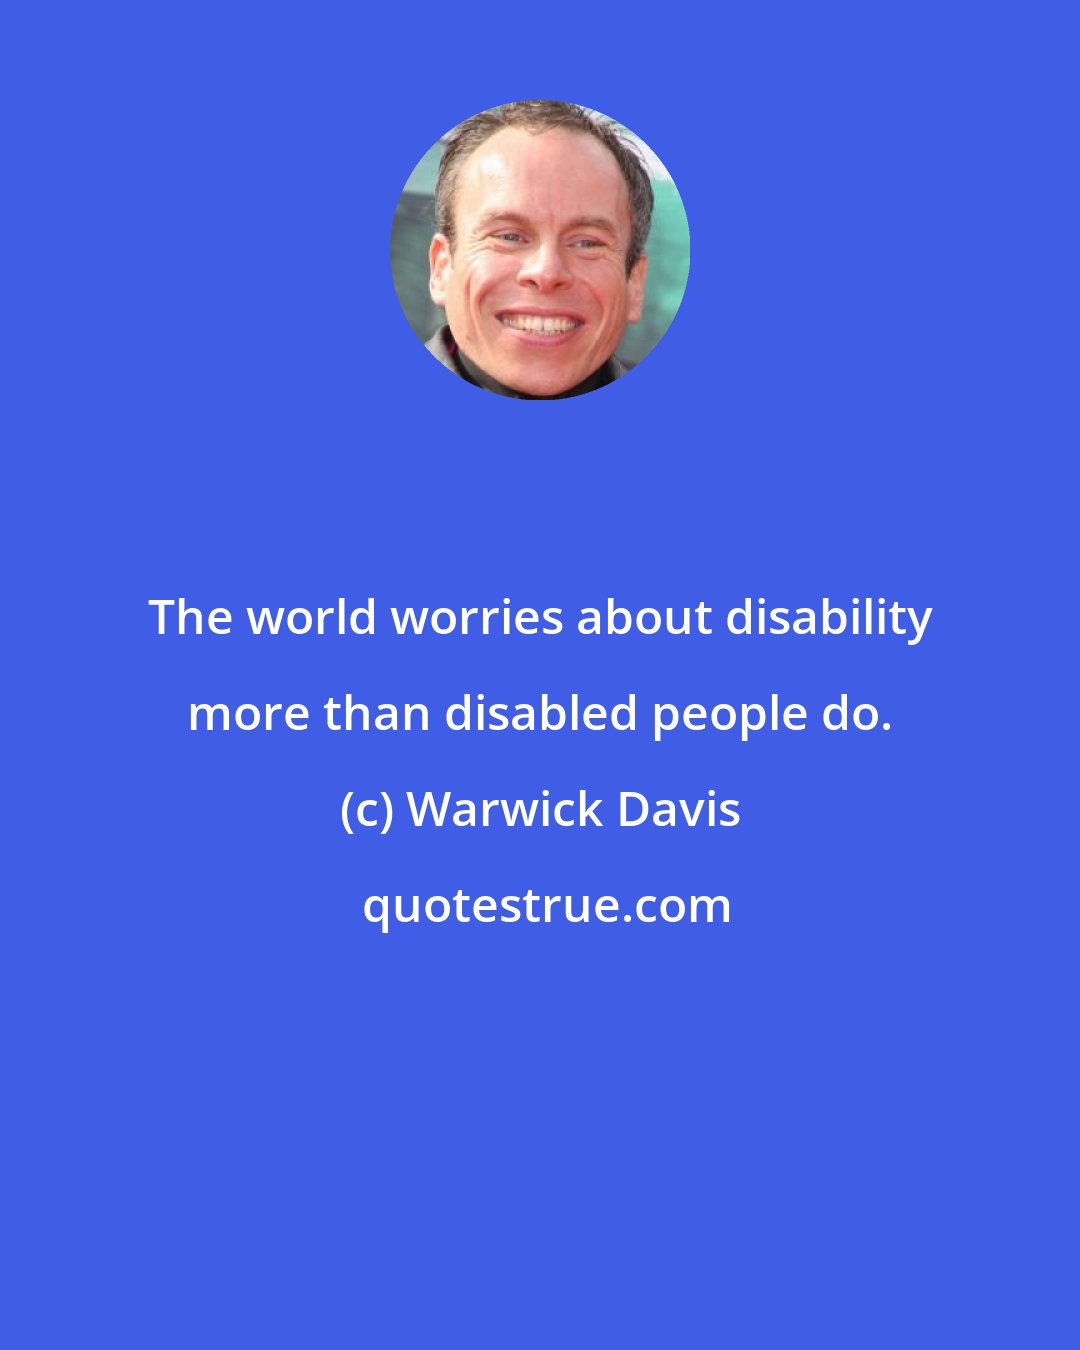 Warwick Davis: The world worries about disability more than disabled people do.